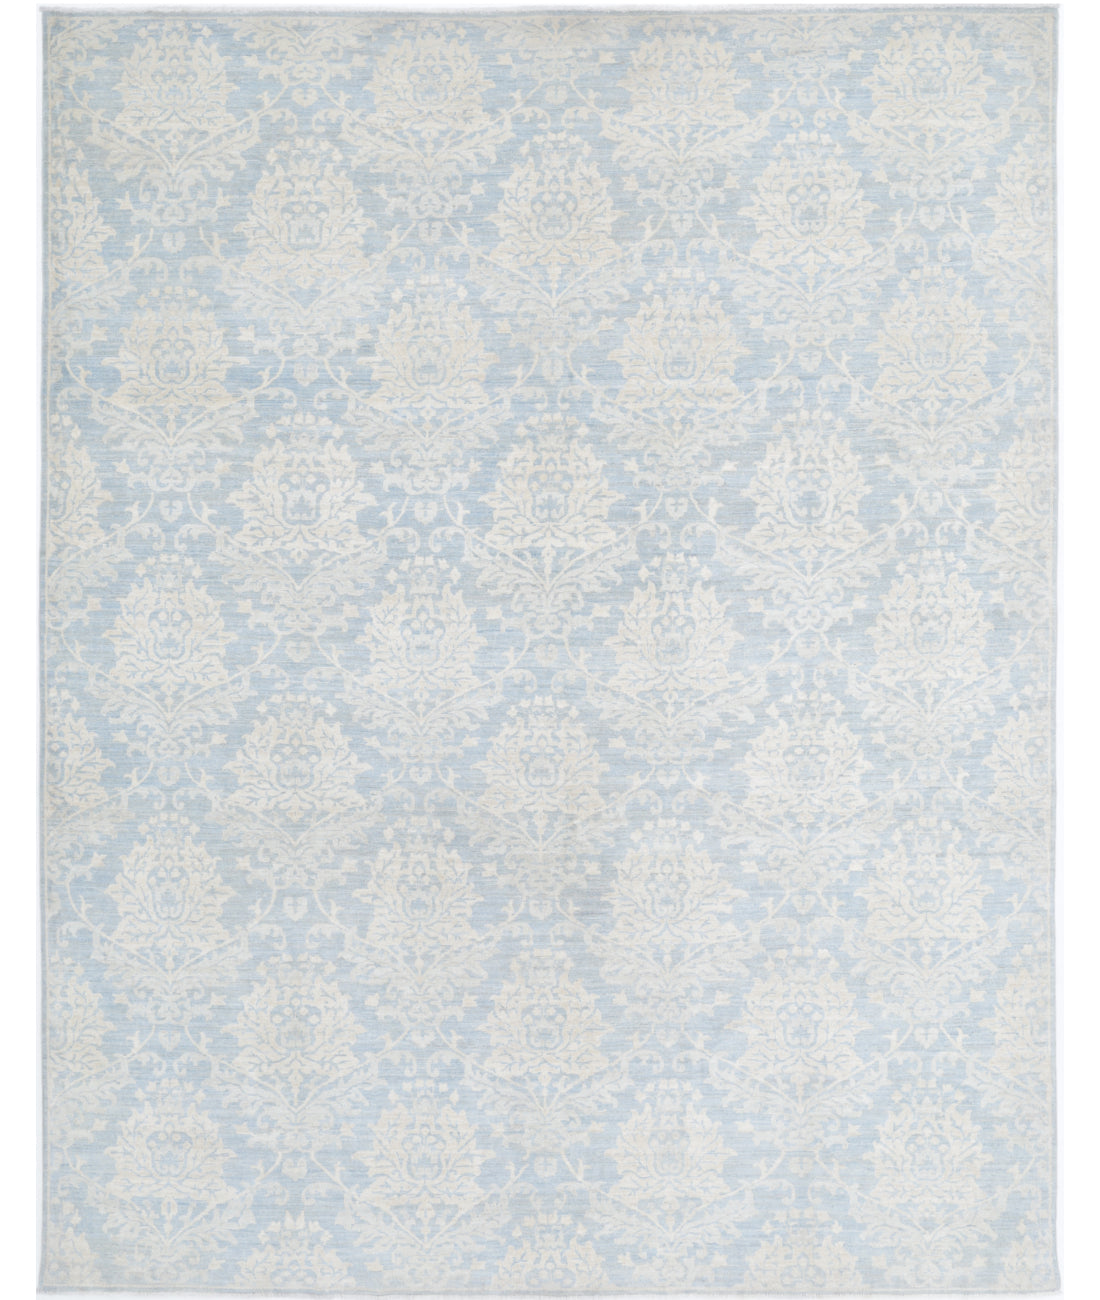 Hand Knotted Art & Craft Wool Rug - 7'9'' x 10'0'' 7'9'' x 10'0'' (233 X 300) / Grey / Taupe